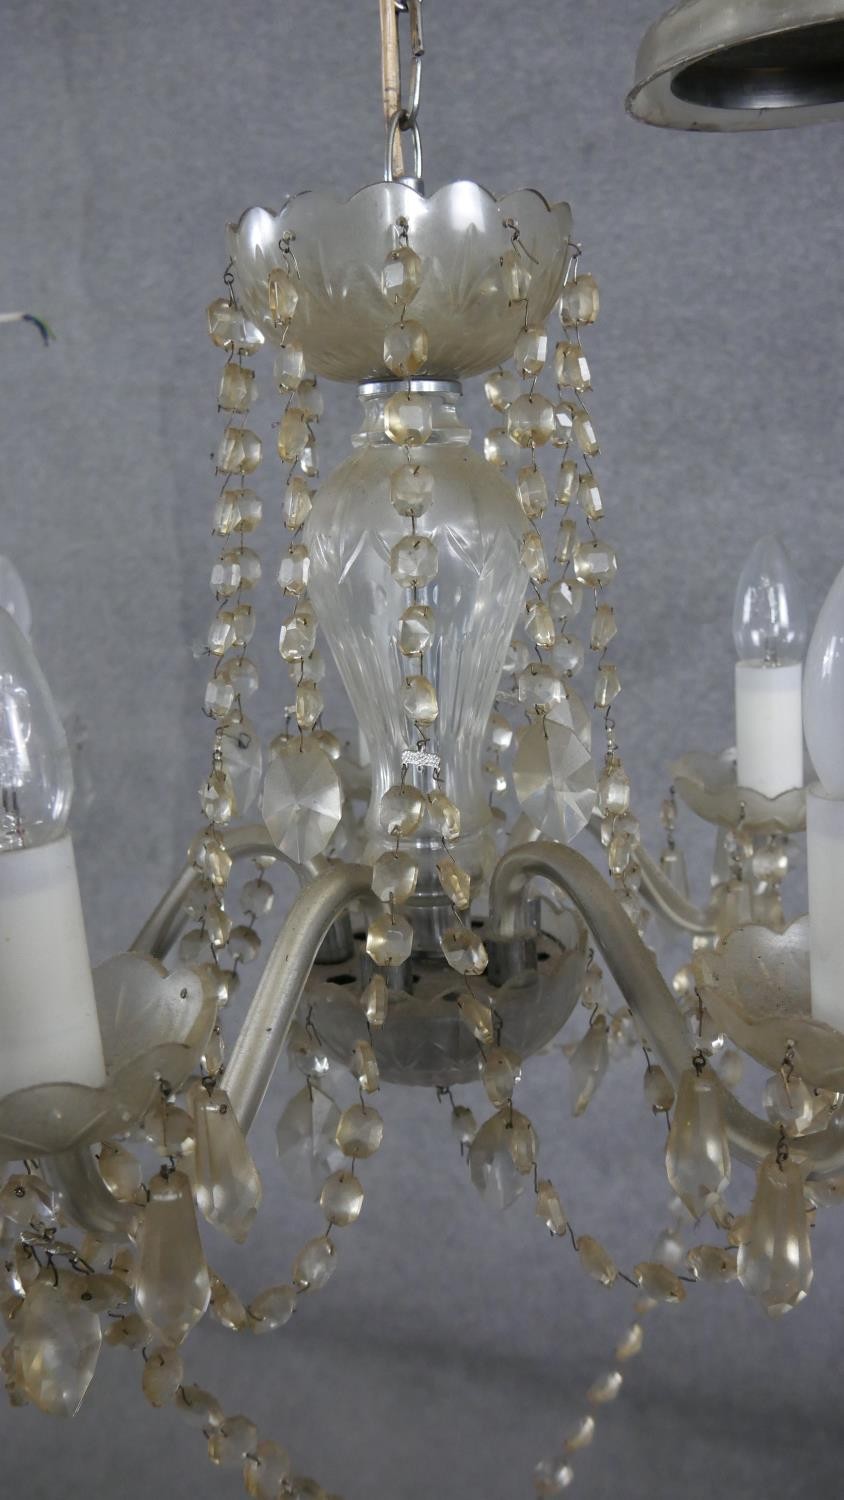 Two vintage cut crystal chandeliers, one eight (branch broken) branch and one five branch with - Image 2 of 6